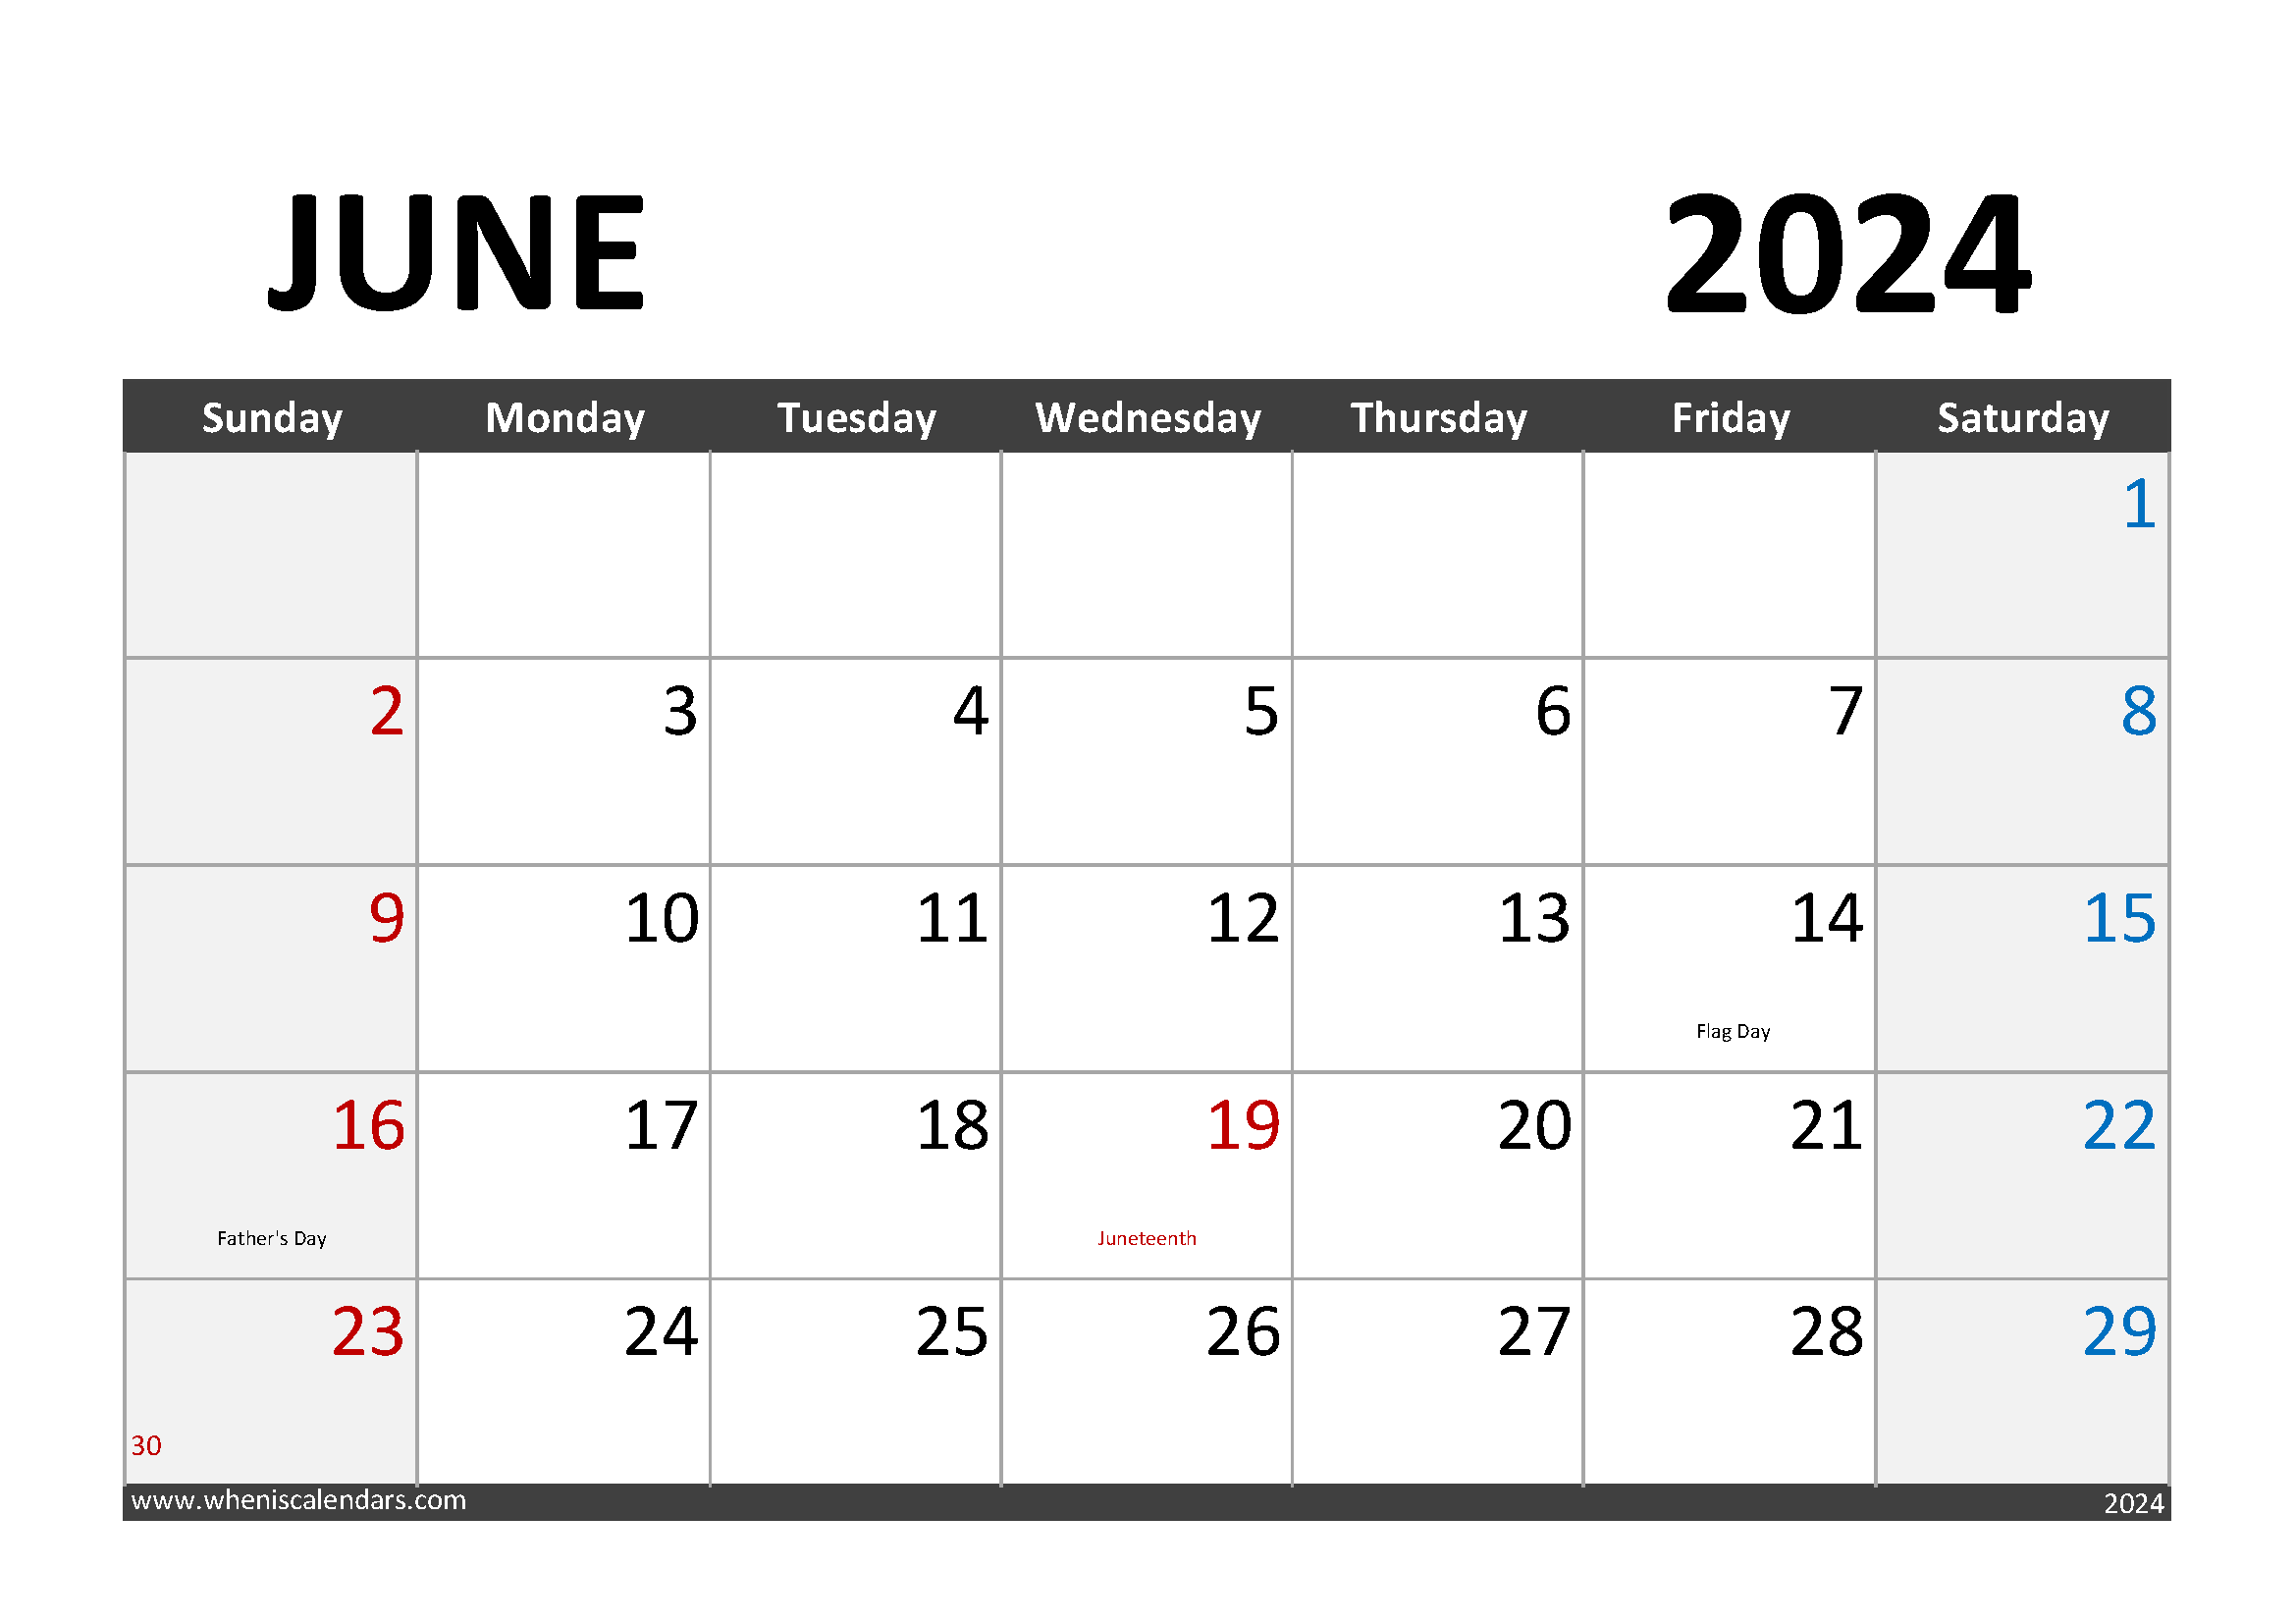 Download June 2024 Calendar with Holidays A4 Horizontal 64004